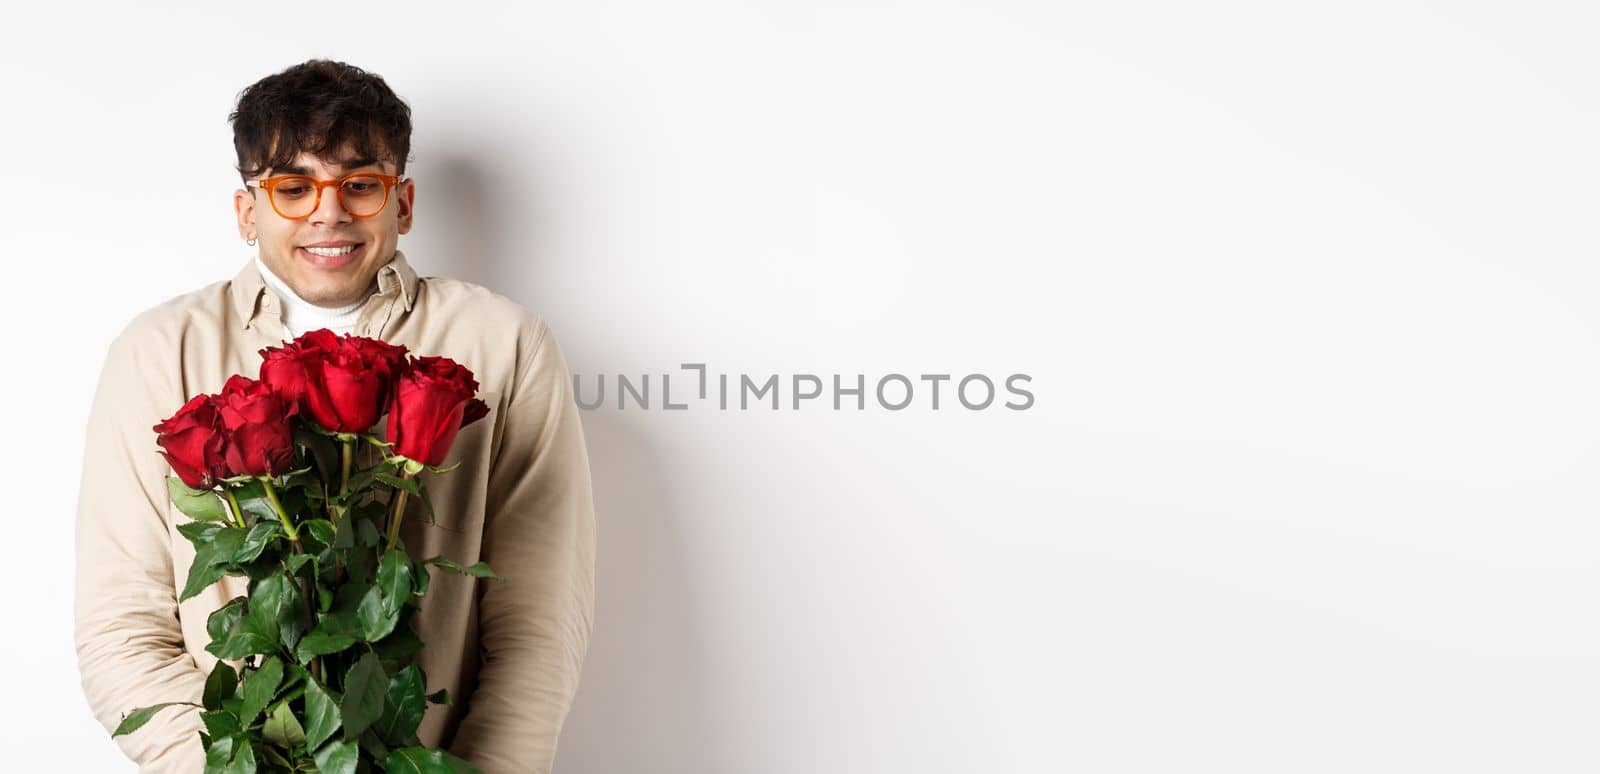 Cheerful gay man receive red roses from boyfriend, looking excited and smiling, having romantic date on Valentines day with lover, standing over white background.